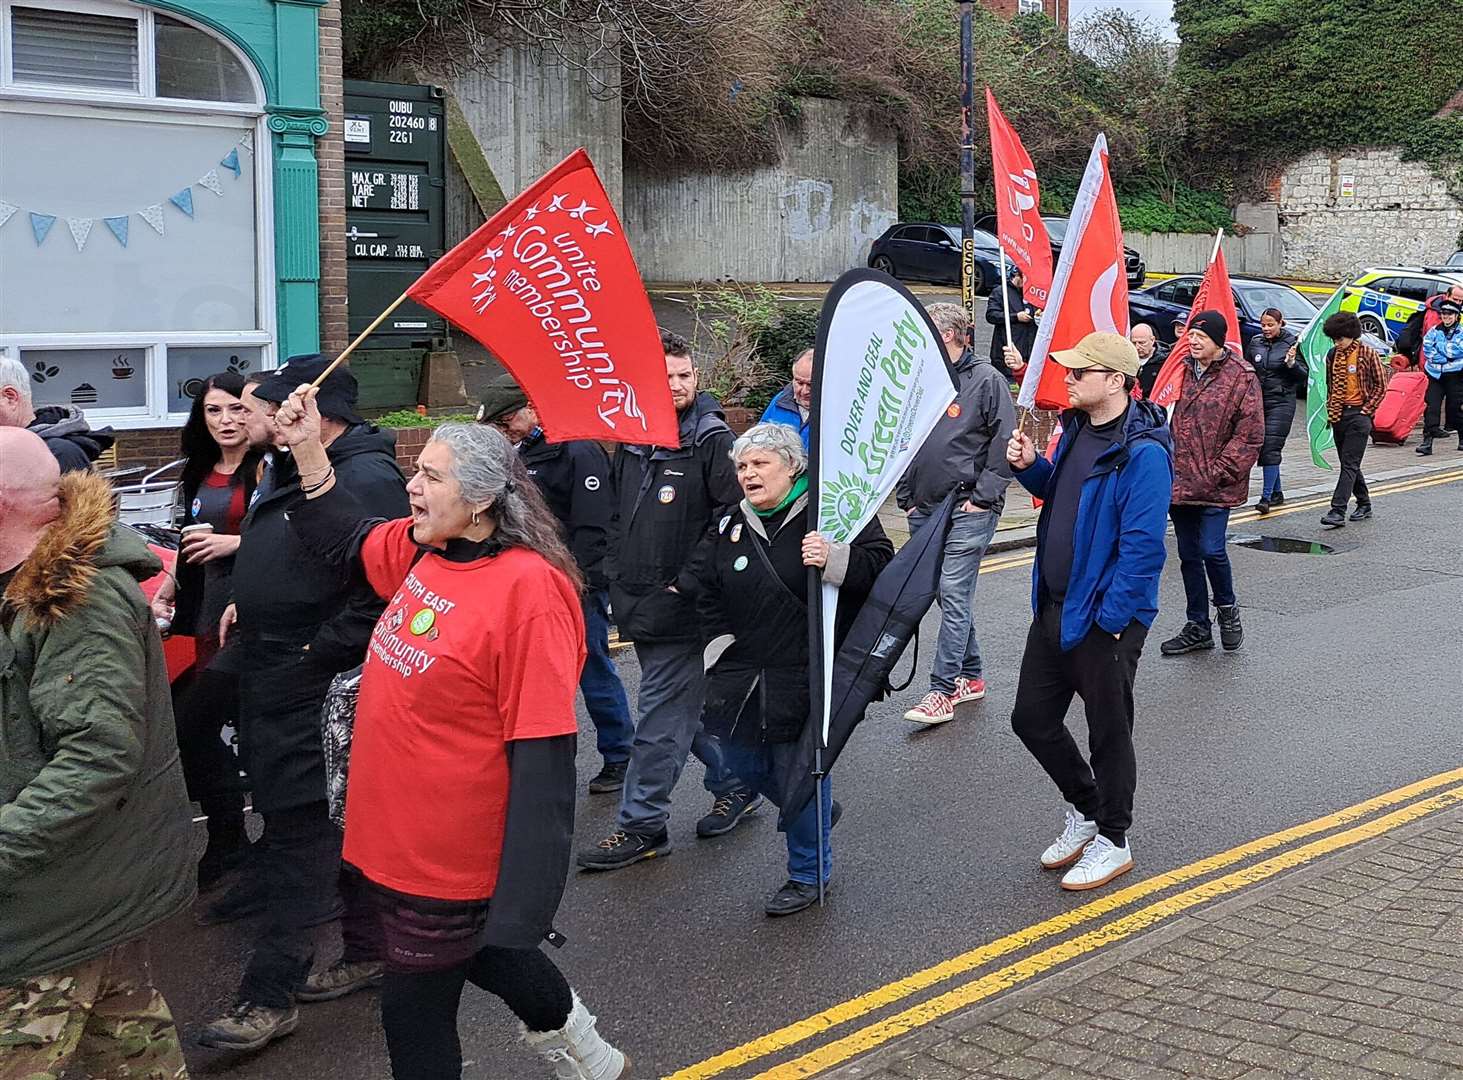 They marched to Channel House in Dover